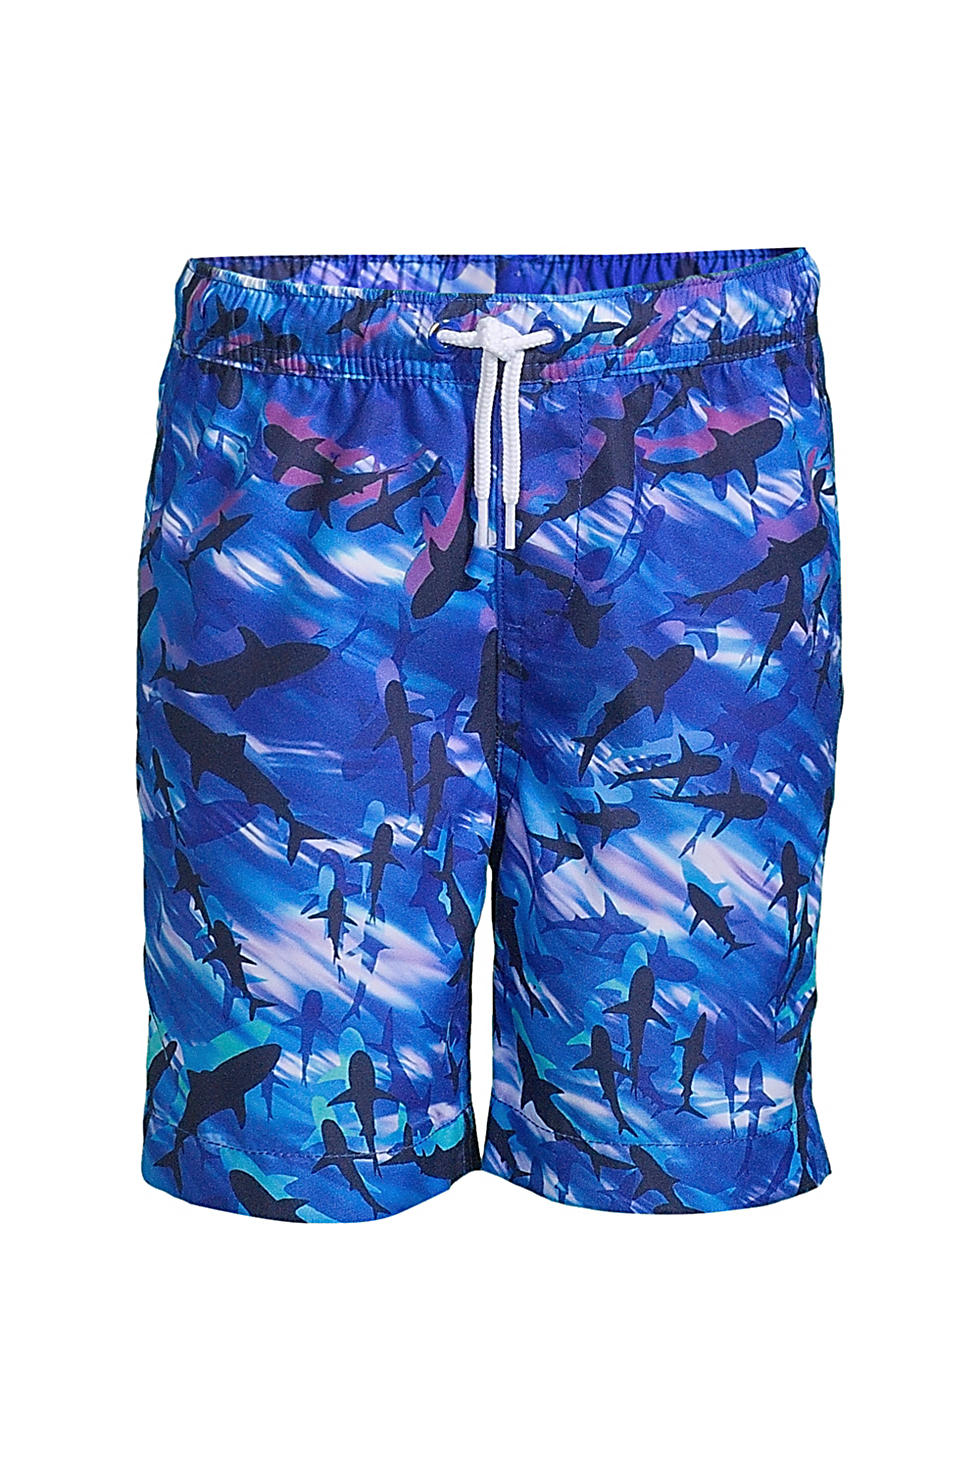 Lands End Boys Printed Swim Trunks (in various colors & size)